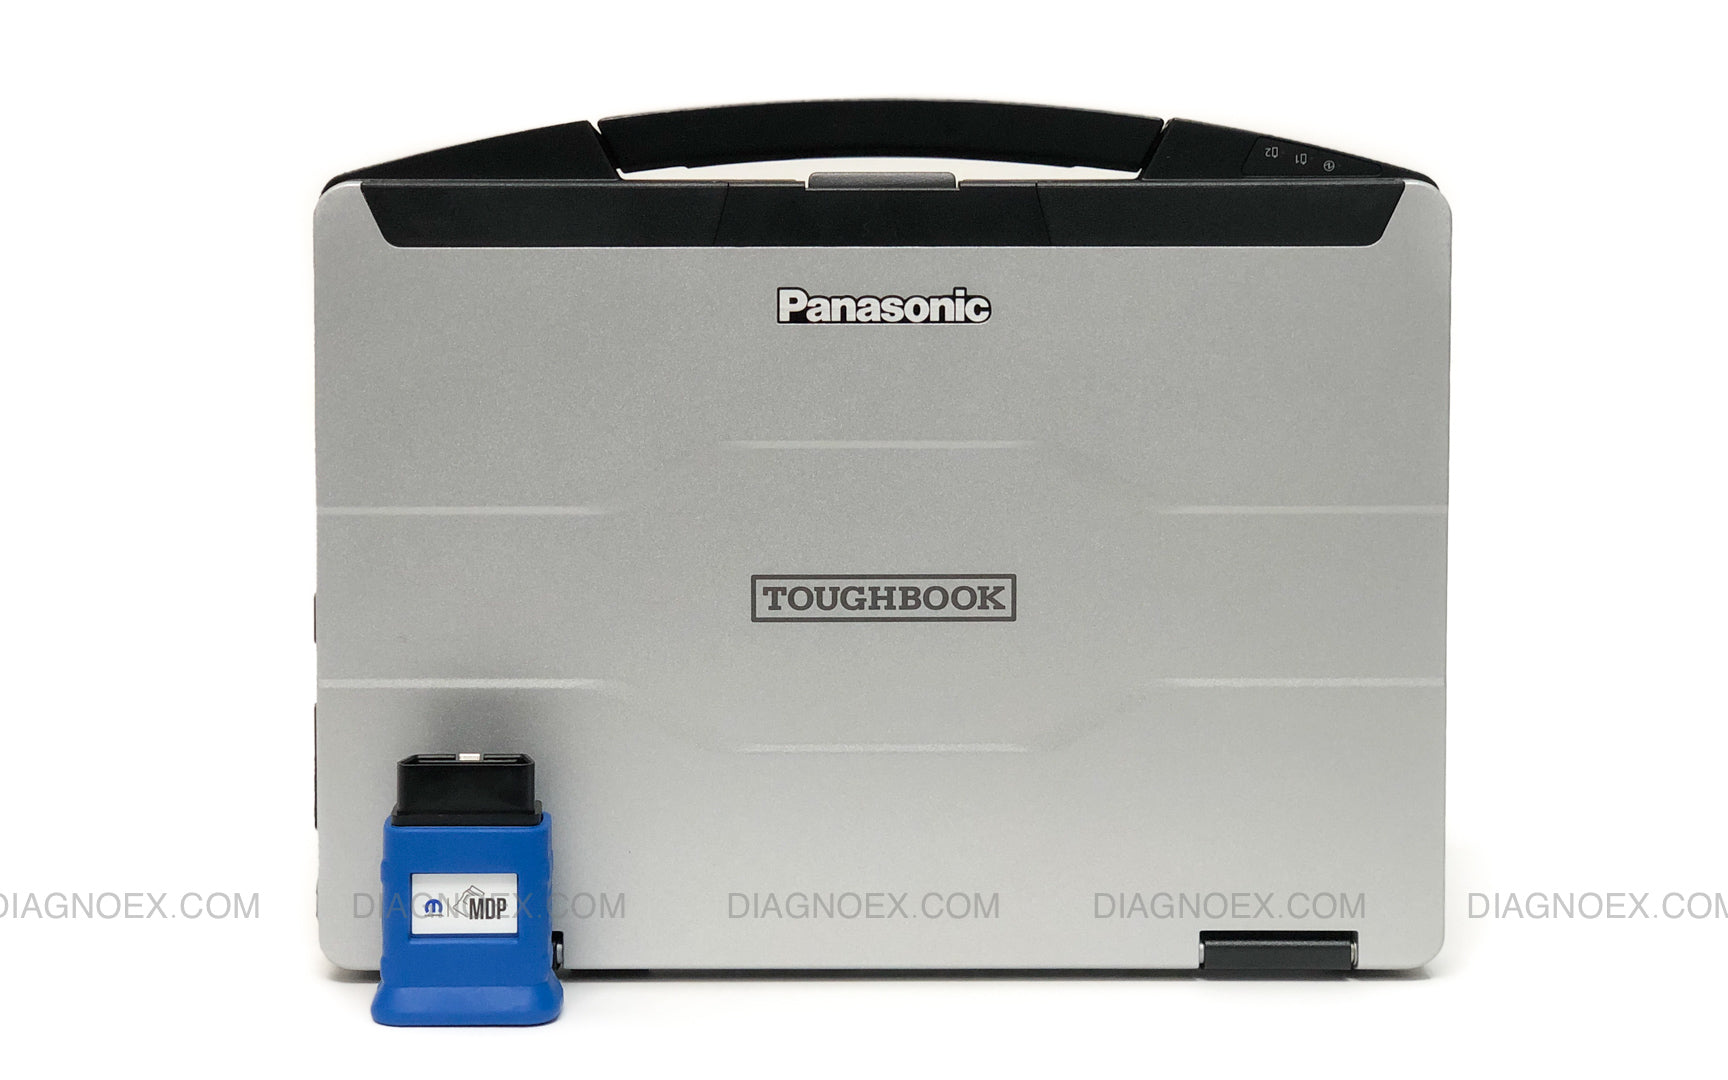 Paquete Chrysler Dodge wiTECH 2 Pro con licencia - Toughbook 55